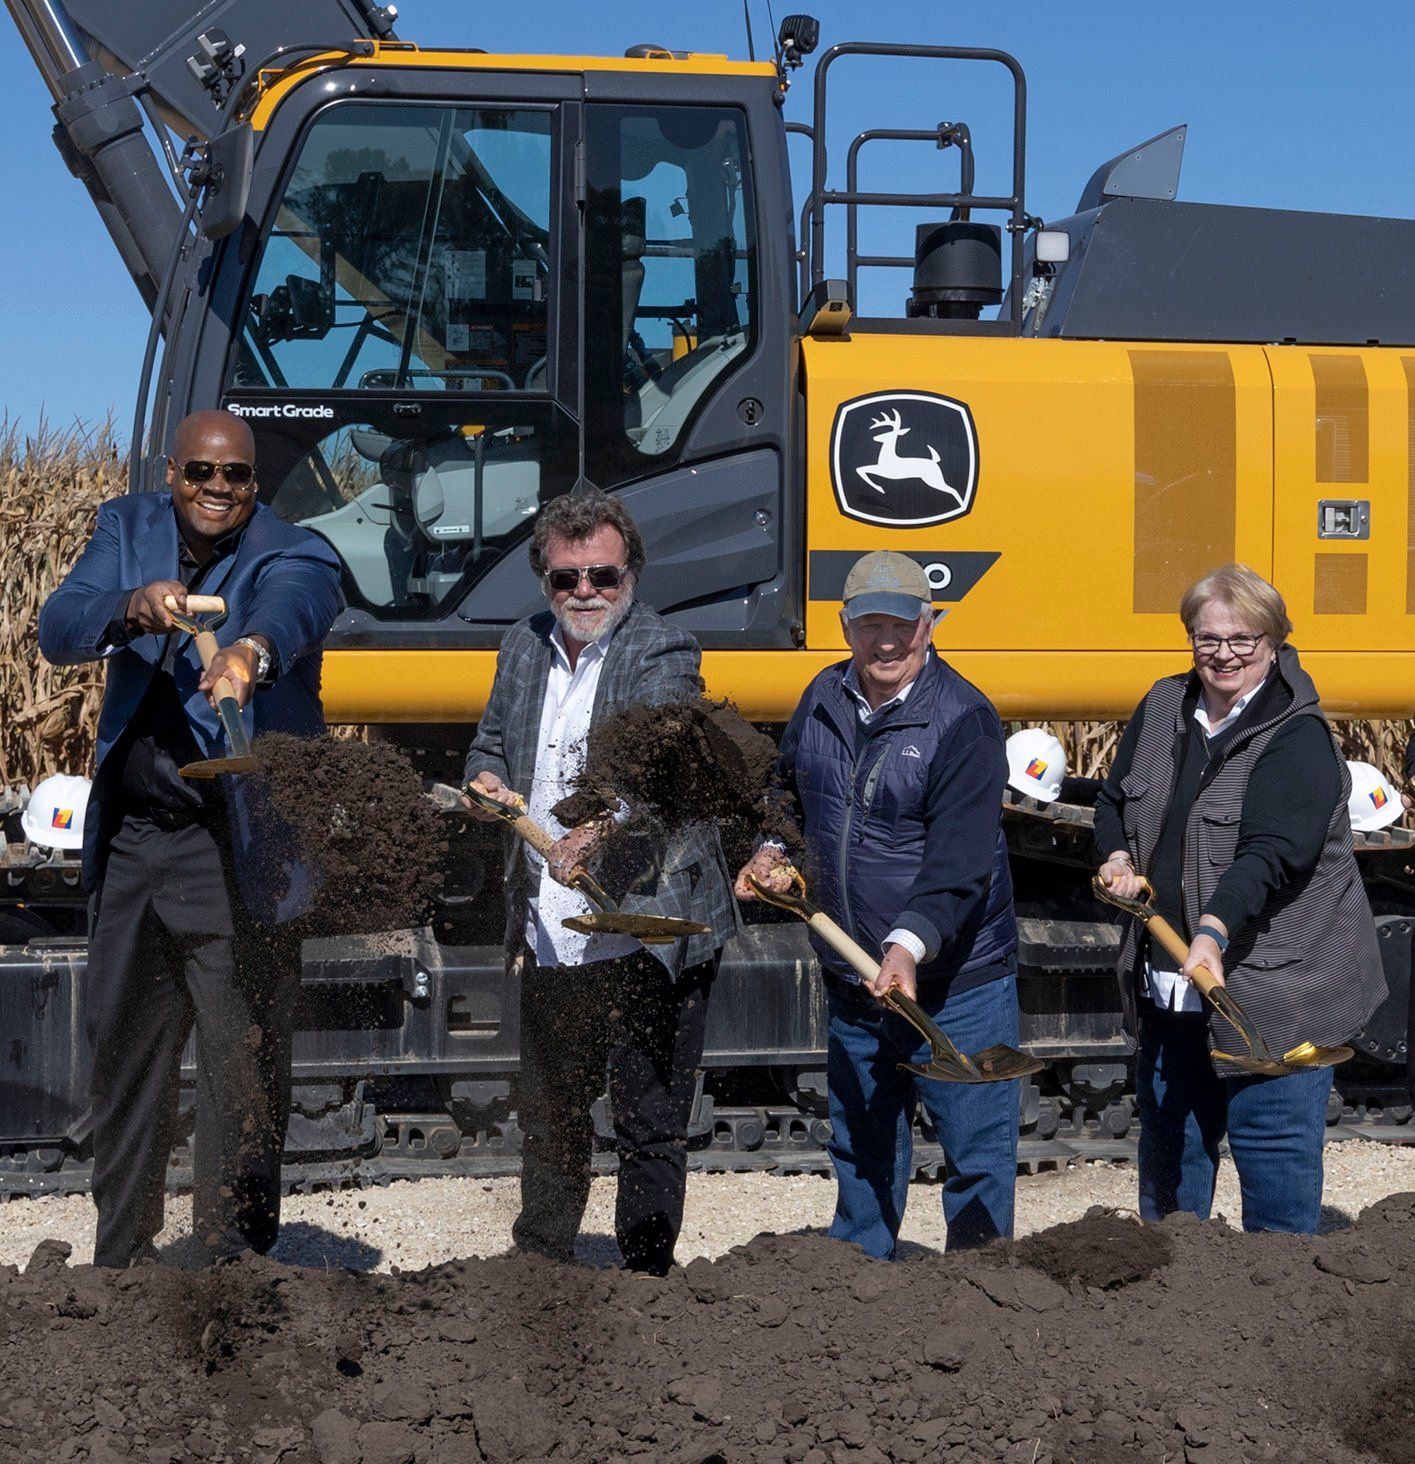 (From left) Frank Thomas, CEO of Go the Distance Baseball; Rick Heidner, investor, Go the Distance Baseball; and former Field of Dreams owners Don Lansing and Becky Lansing shovel dirt during the Project Heaven groundbreaking ceremony Wednesday at the Field of Dreams in Dyersville, Iowa.    PHOTO CREDIT: Stephen Gassman